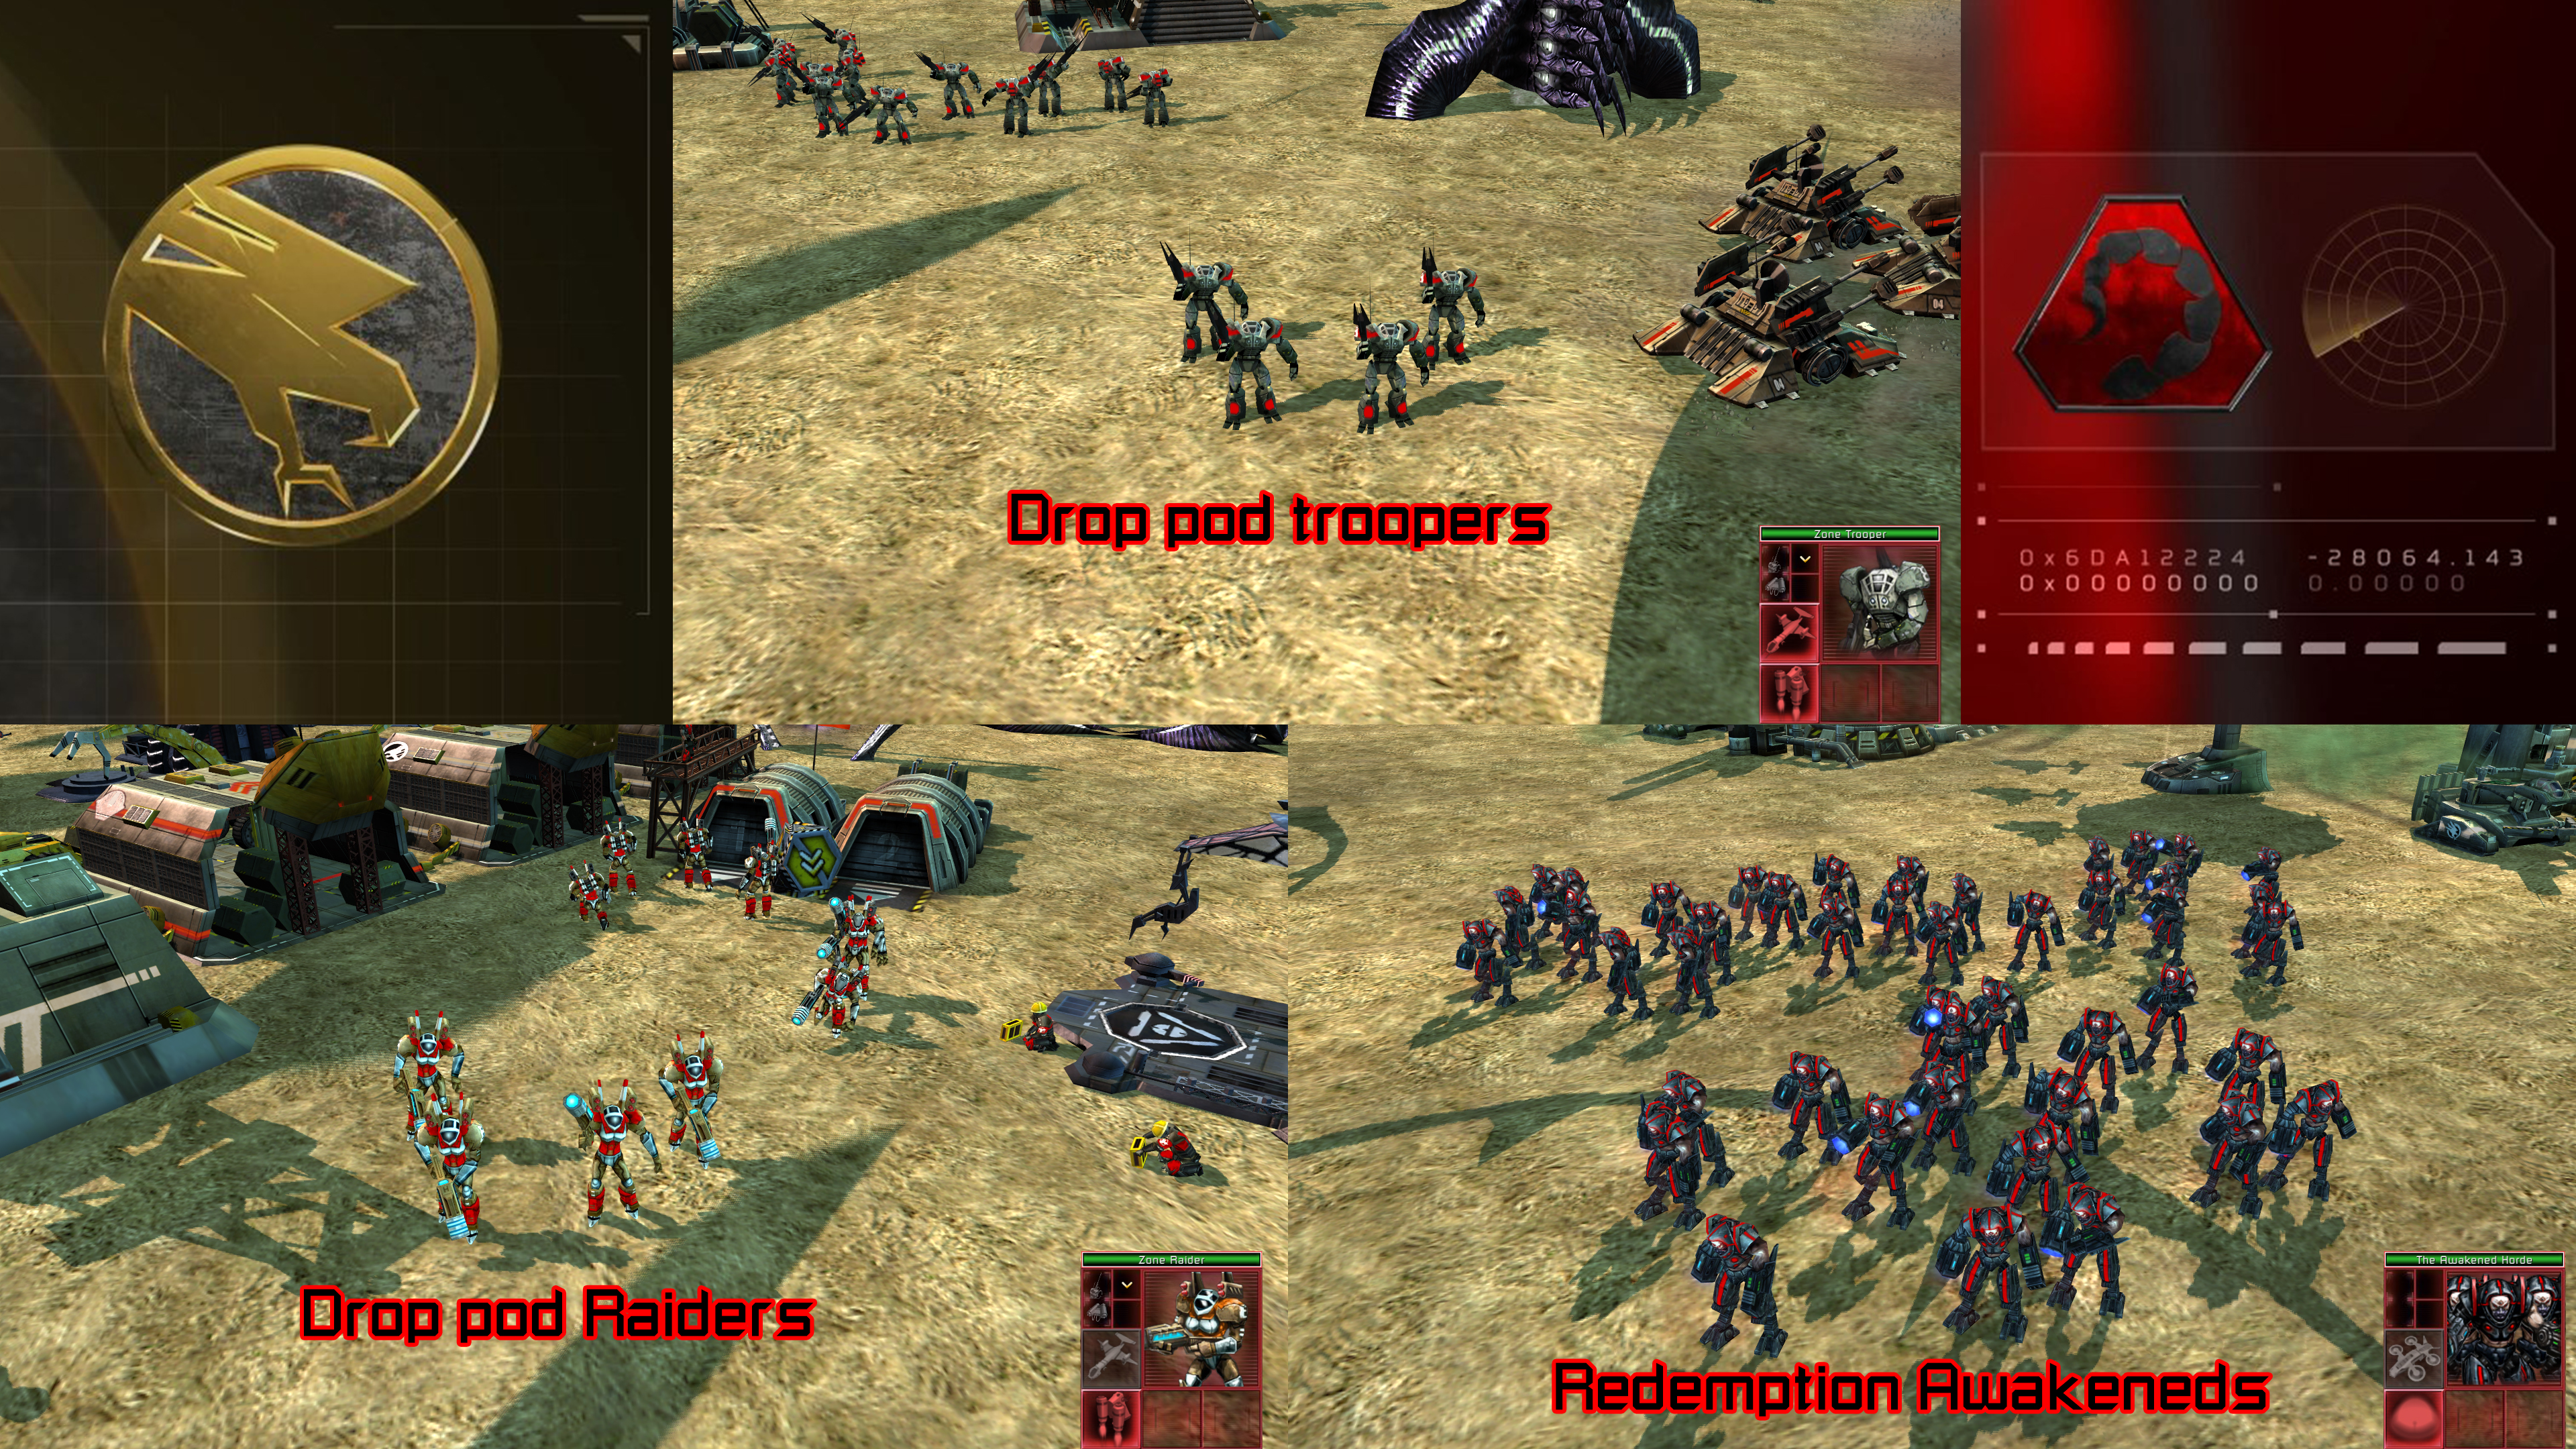 command and conquer 3 kanes wrath raider